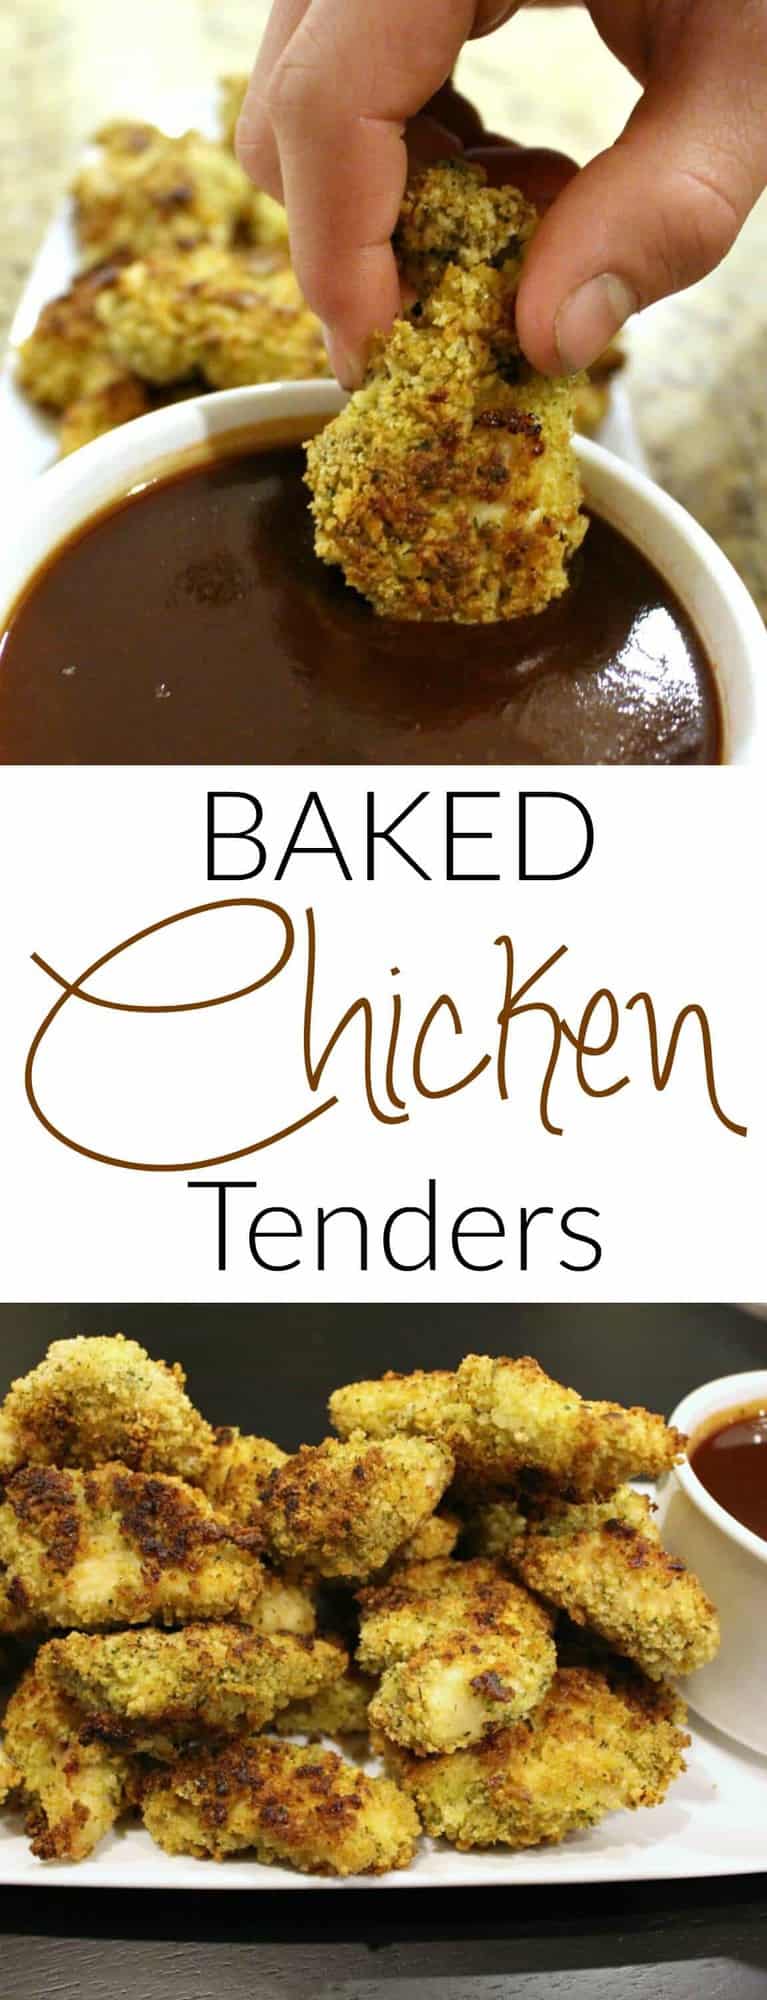 Baked Chicken Tenders - a healthy and delicious weeknight meal for the family